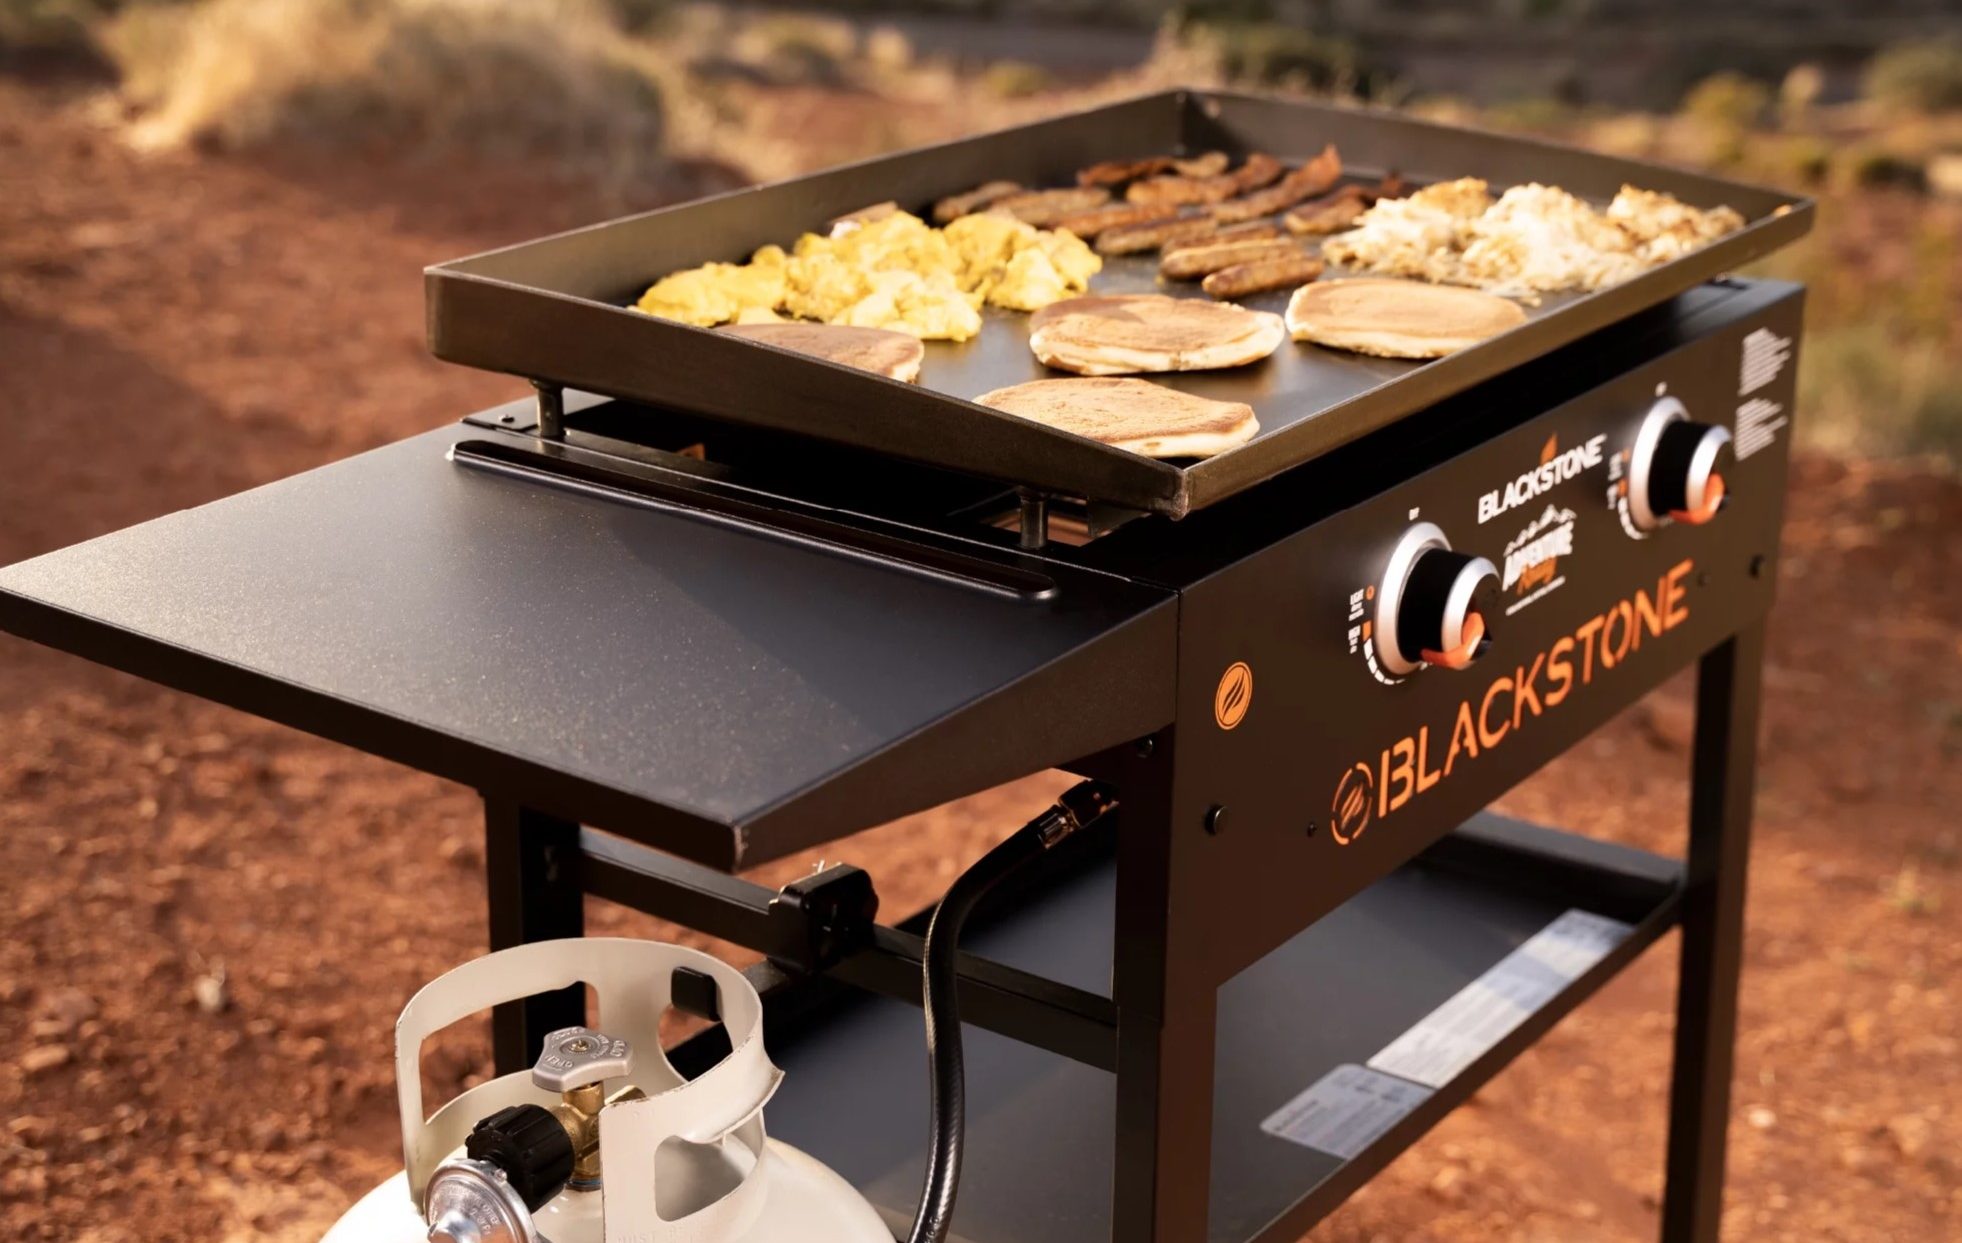 https://www.themanual.com/wp-content/uploads/sites/9/2023/10/Blackstone-Griddle-two-burner-with-breakfast-cooking-e1697655186282.jpg?fit=800%2C800&p=1